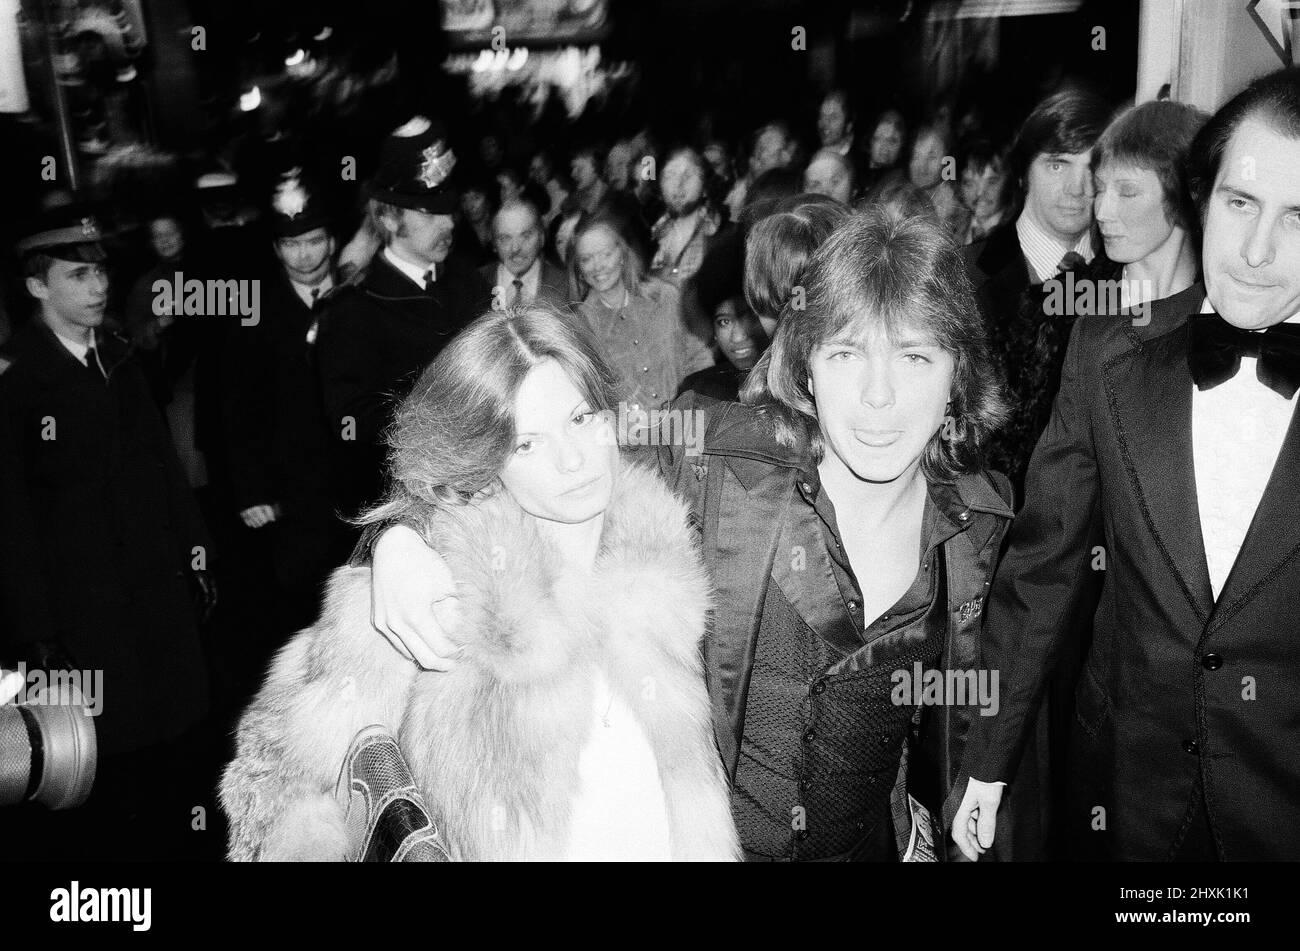 David Cassidy, singer, actor and musician, in London. 1977. David arrives at The Rialto Cinema, Leicester Square, London for the film premiere of The Great Scout and Cathouse Thursday with his secret fianc¿ Kay Lenz  David Bruce Cassidy is widely known for his role as Keith Partridge in the 1970s musical sitcom The Partridge Family, which led to his becoming one of pop culture's most celebrated teen idols and pop singers of the 1970s. He later had a career in both acting and music.  Picture taken 10th March 1977David Cassidy, singer, actor and musician, in London. 1977.  David arrives at The R Stock Photo